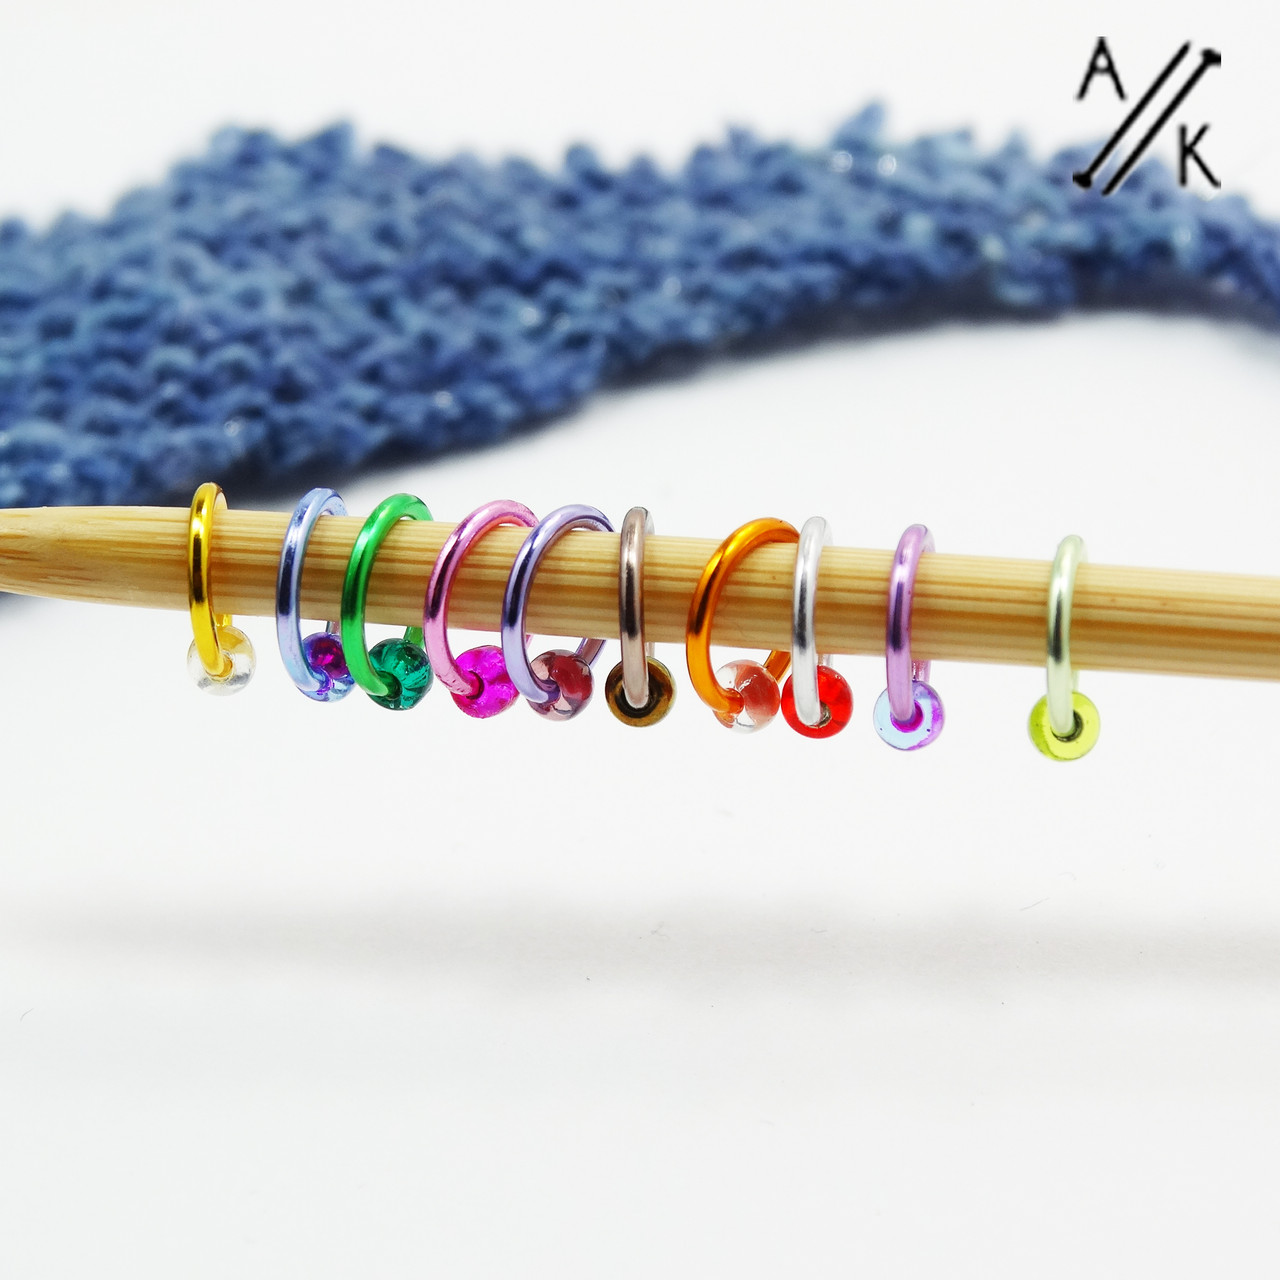 DIY stitch markers for knitting